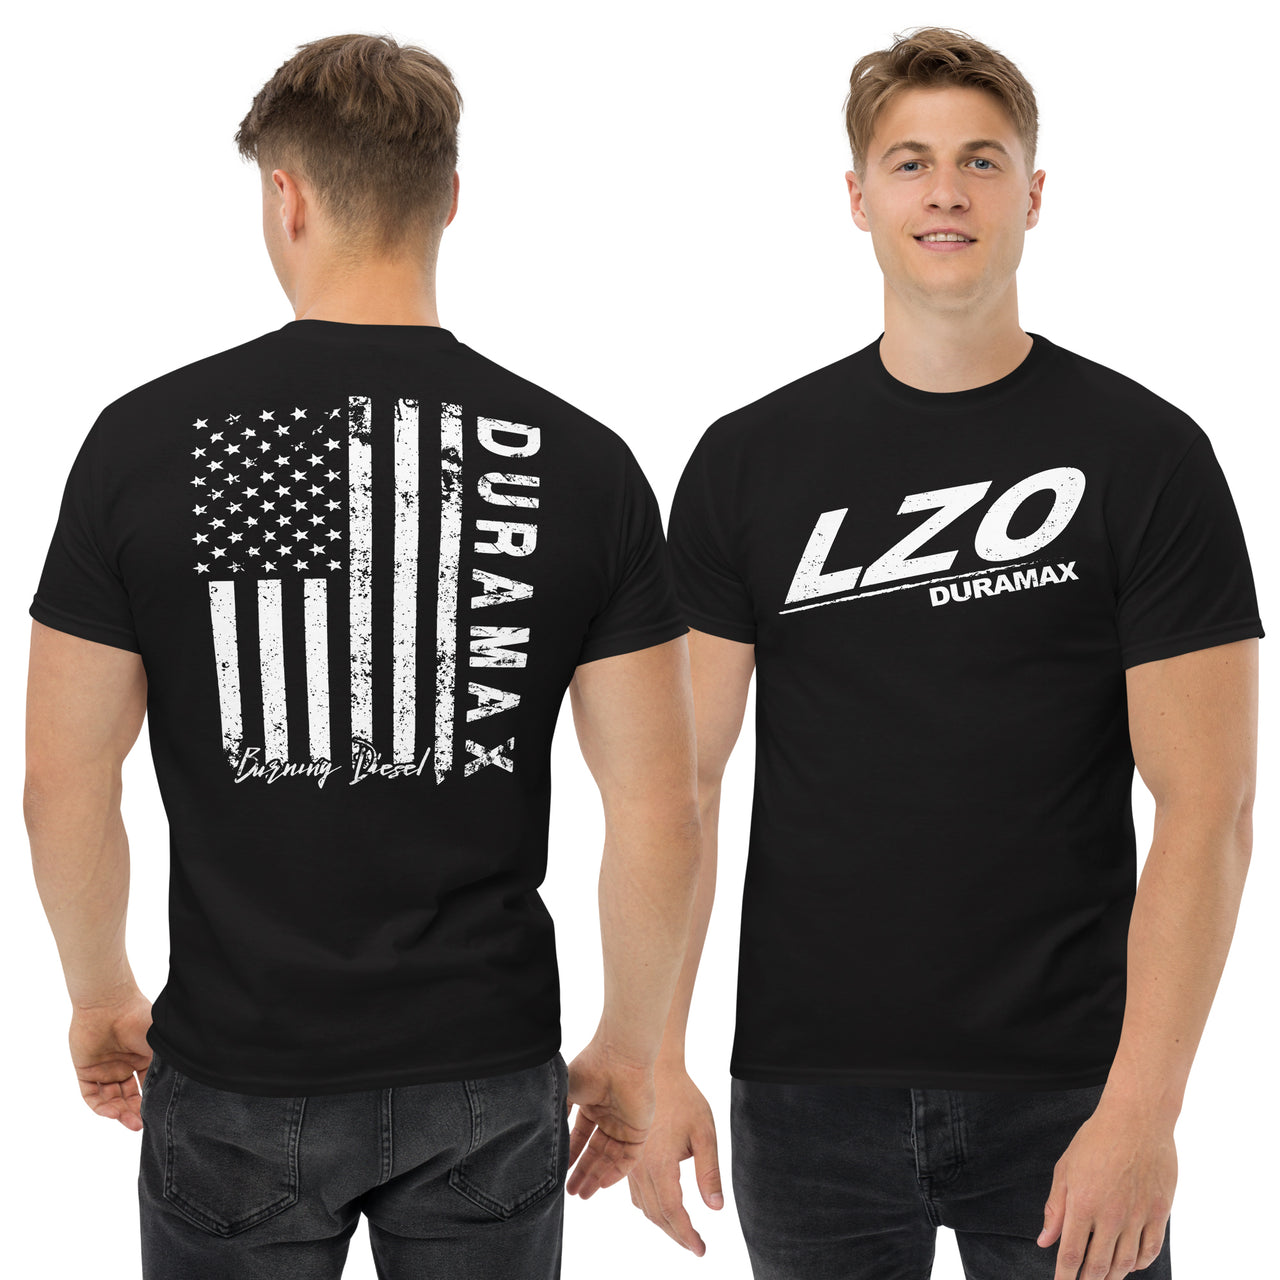 LZO Duramax T-Shirt With American Flag Design modeled in black